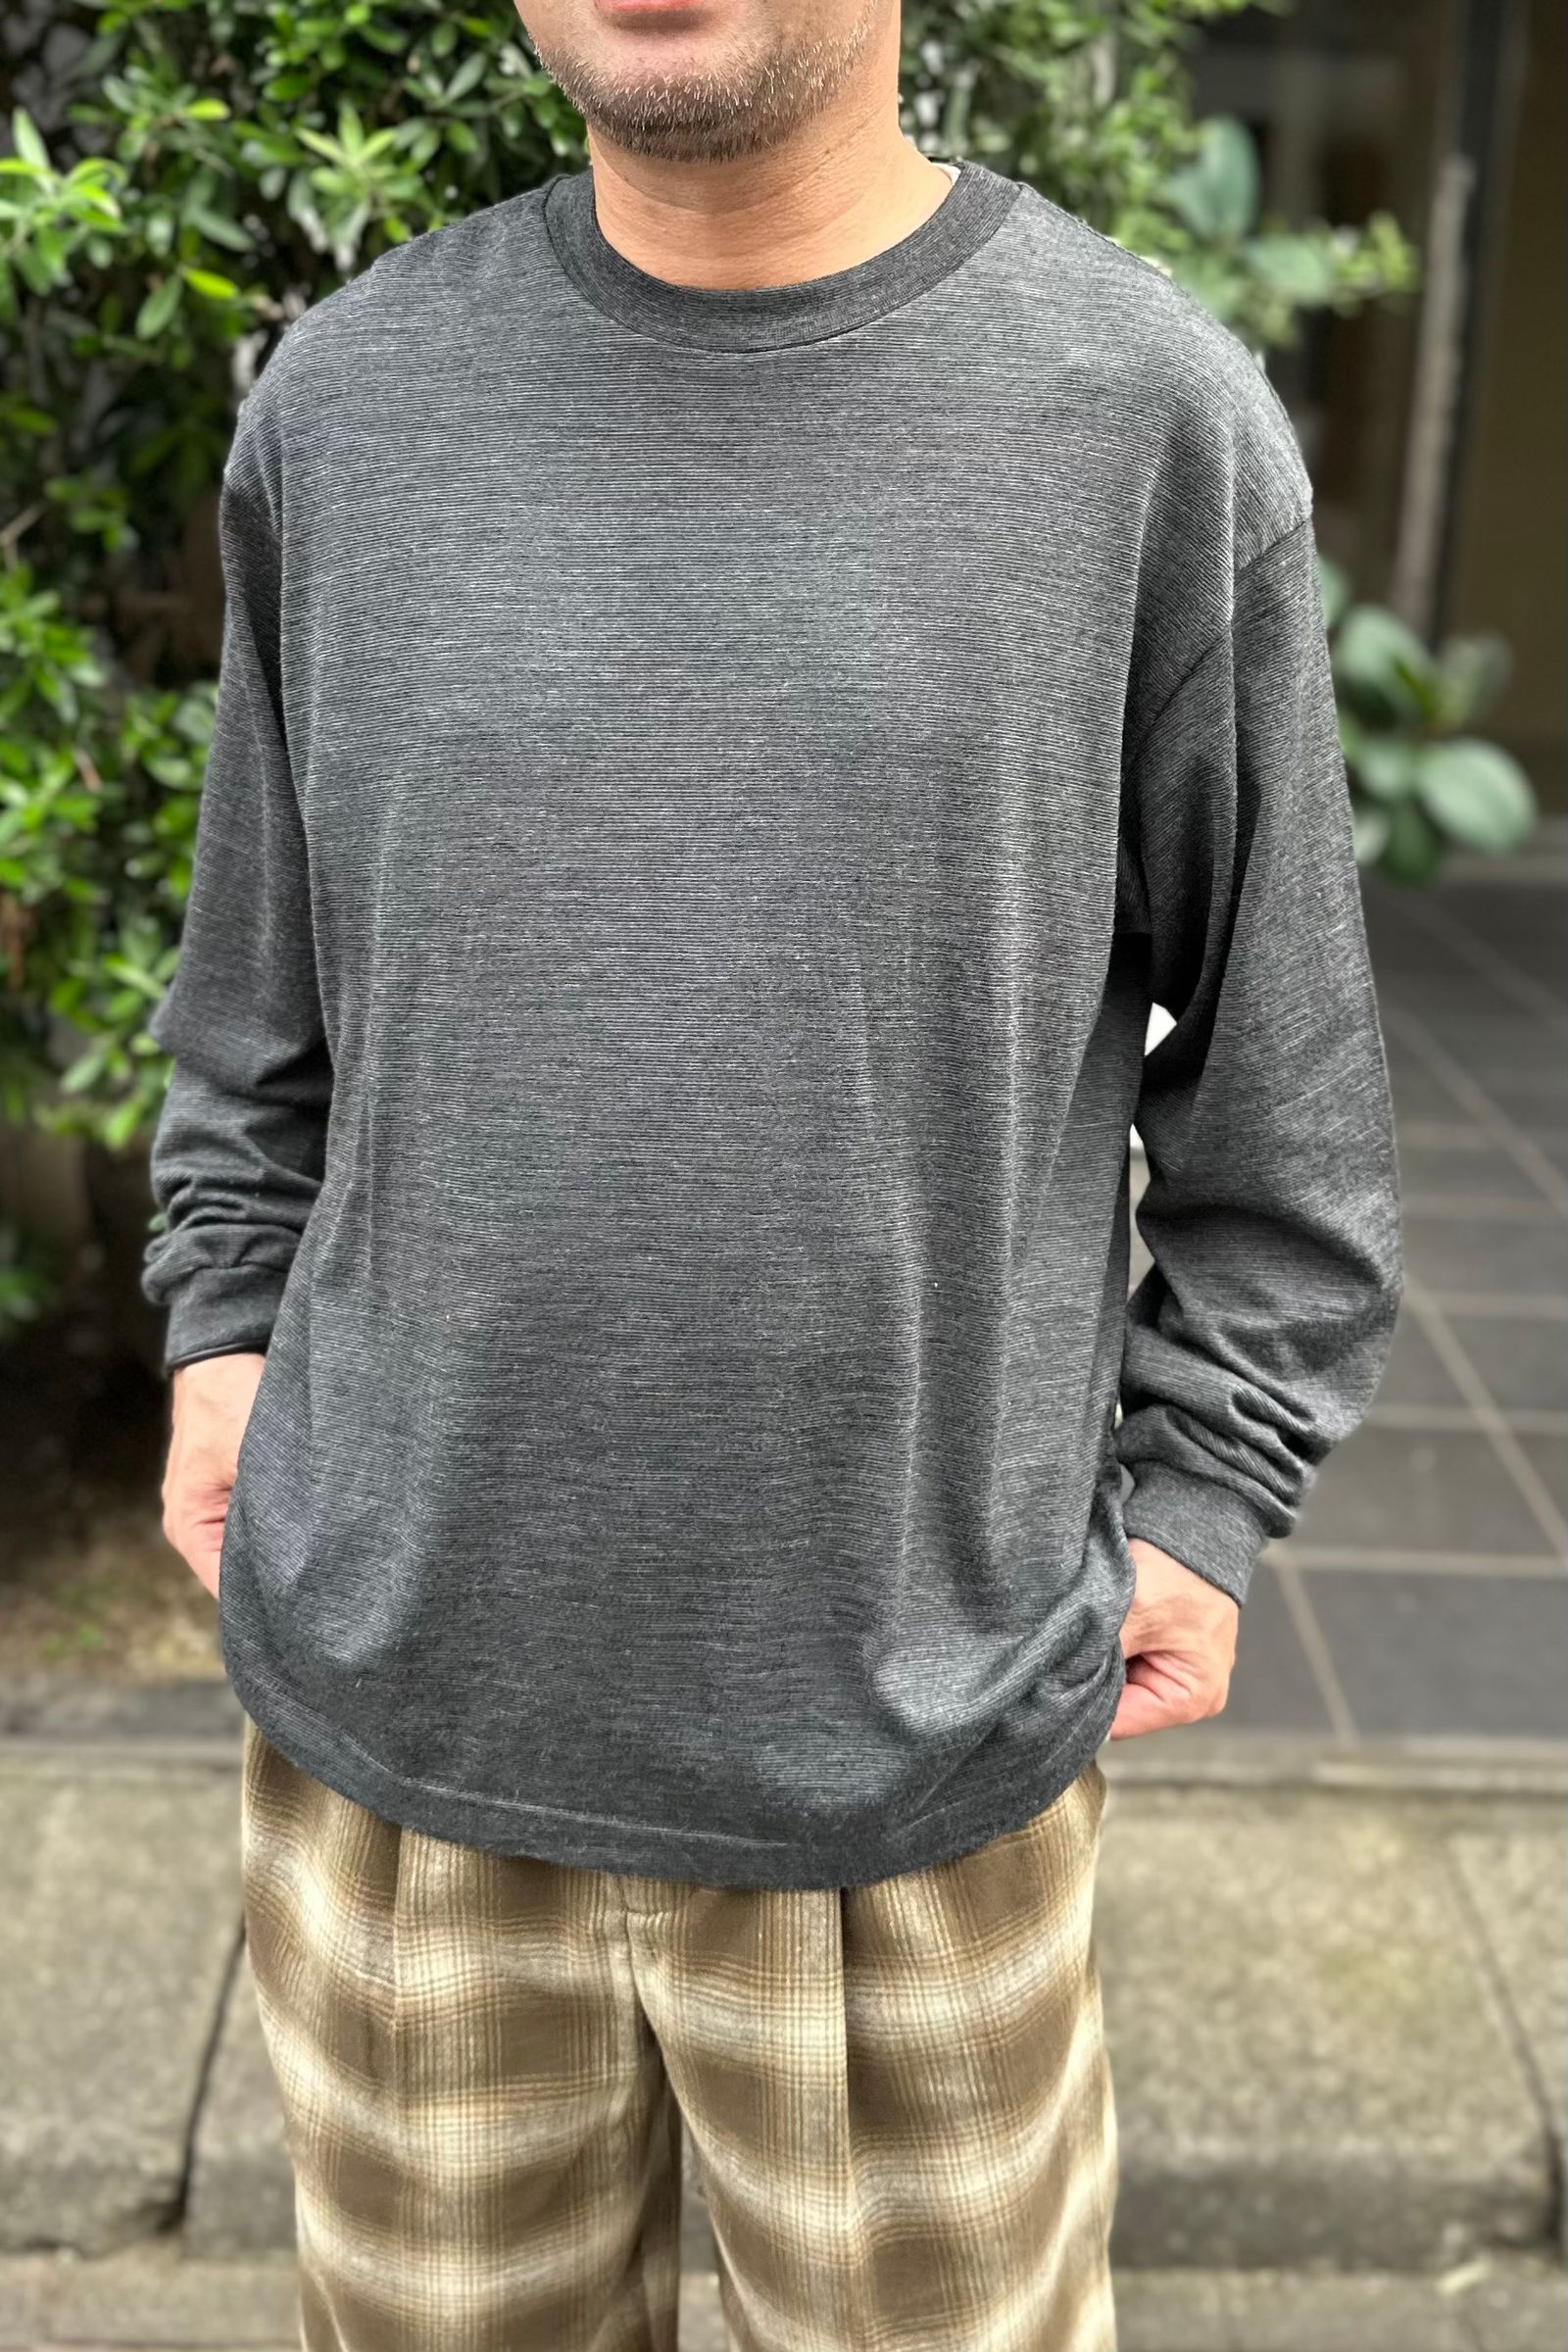 UNIVERSAL PRODUCTS - WOOL L/S T-SHIRT -gray- 23aw | asterisk